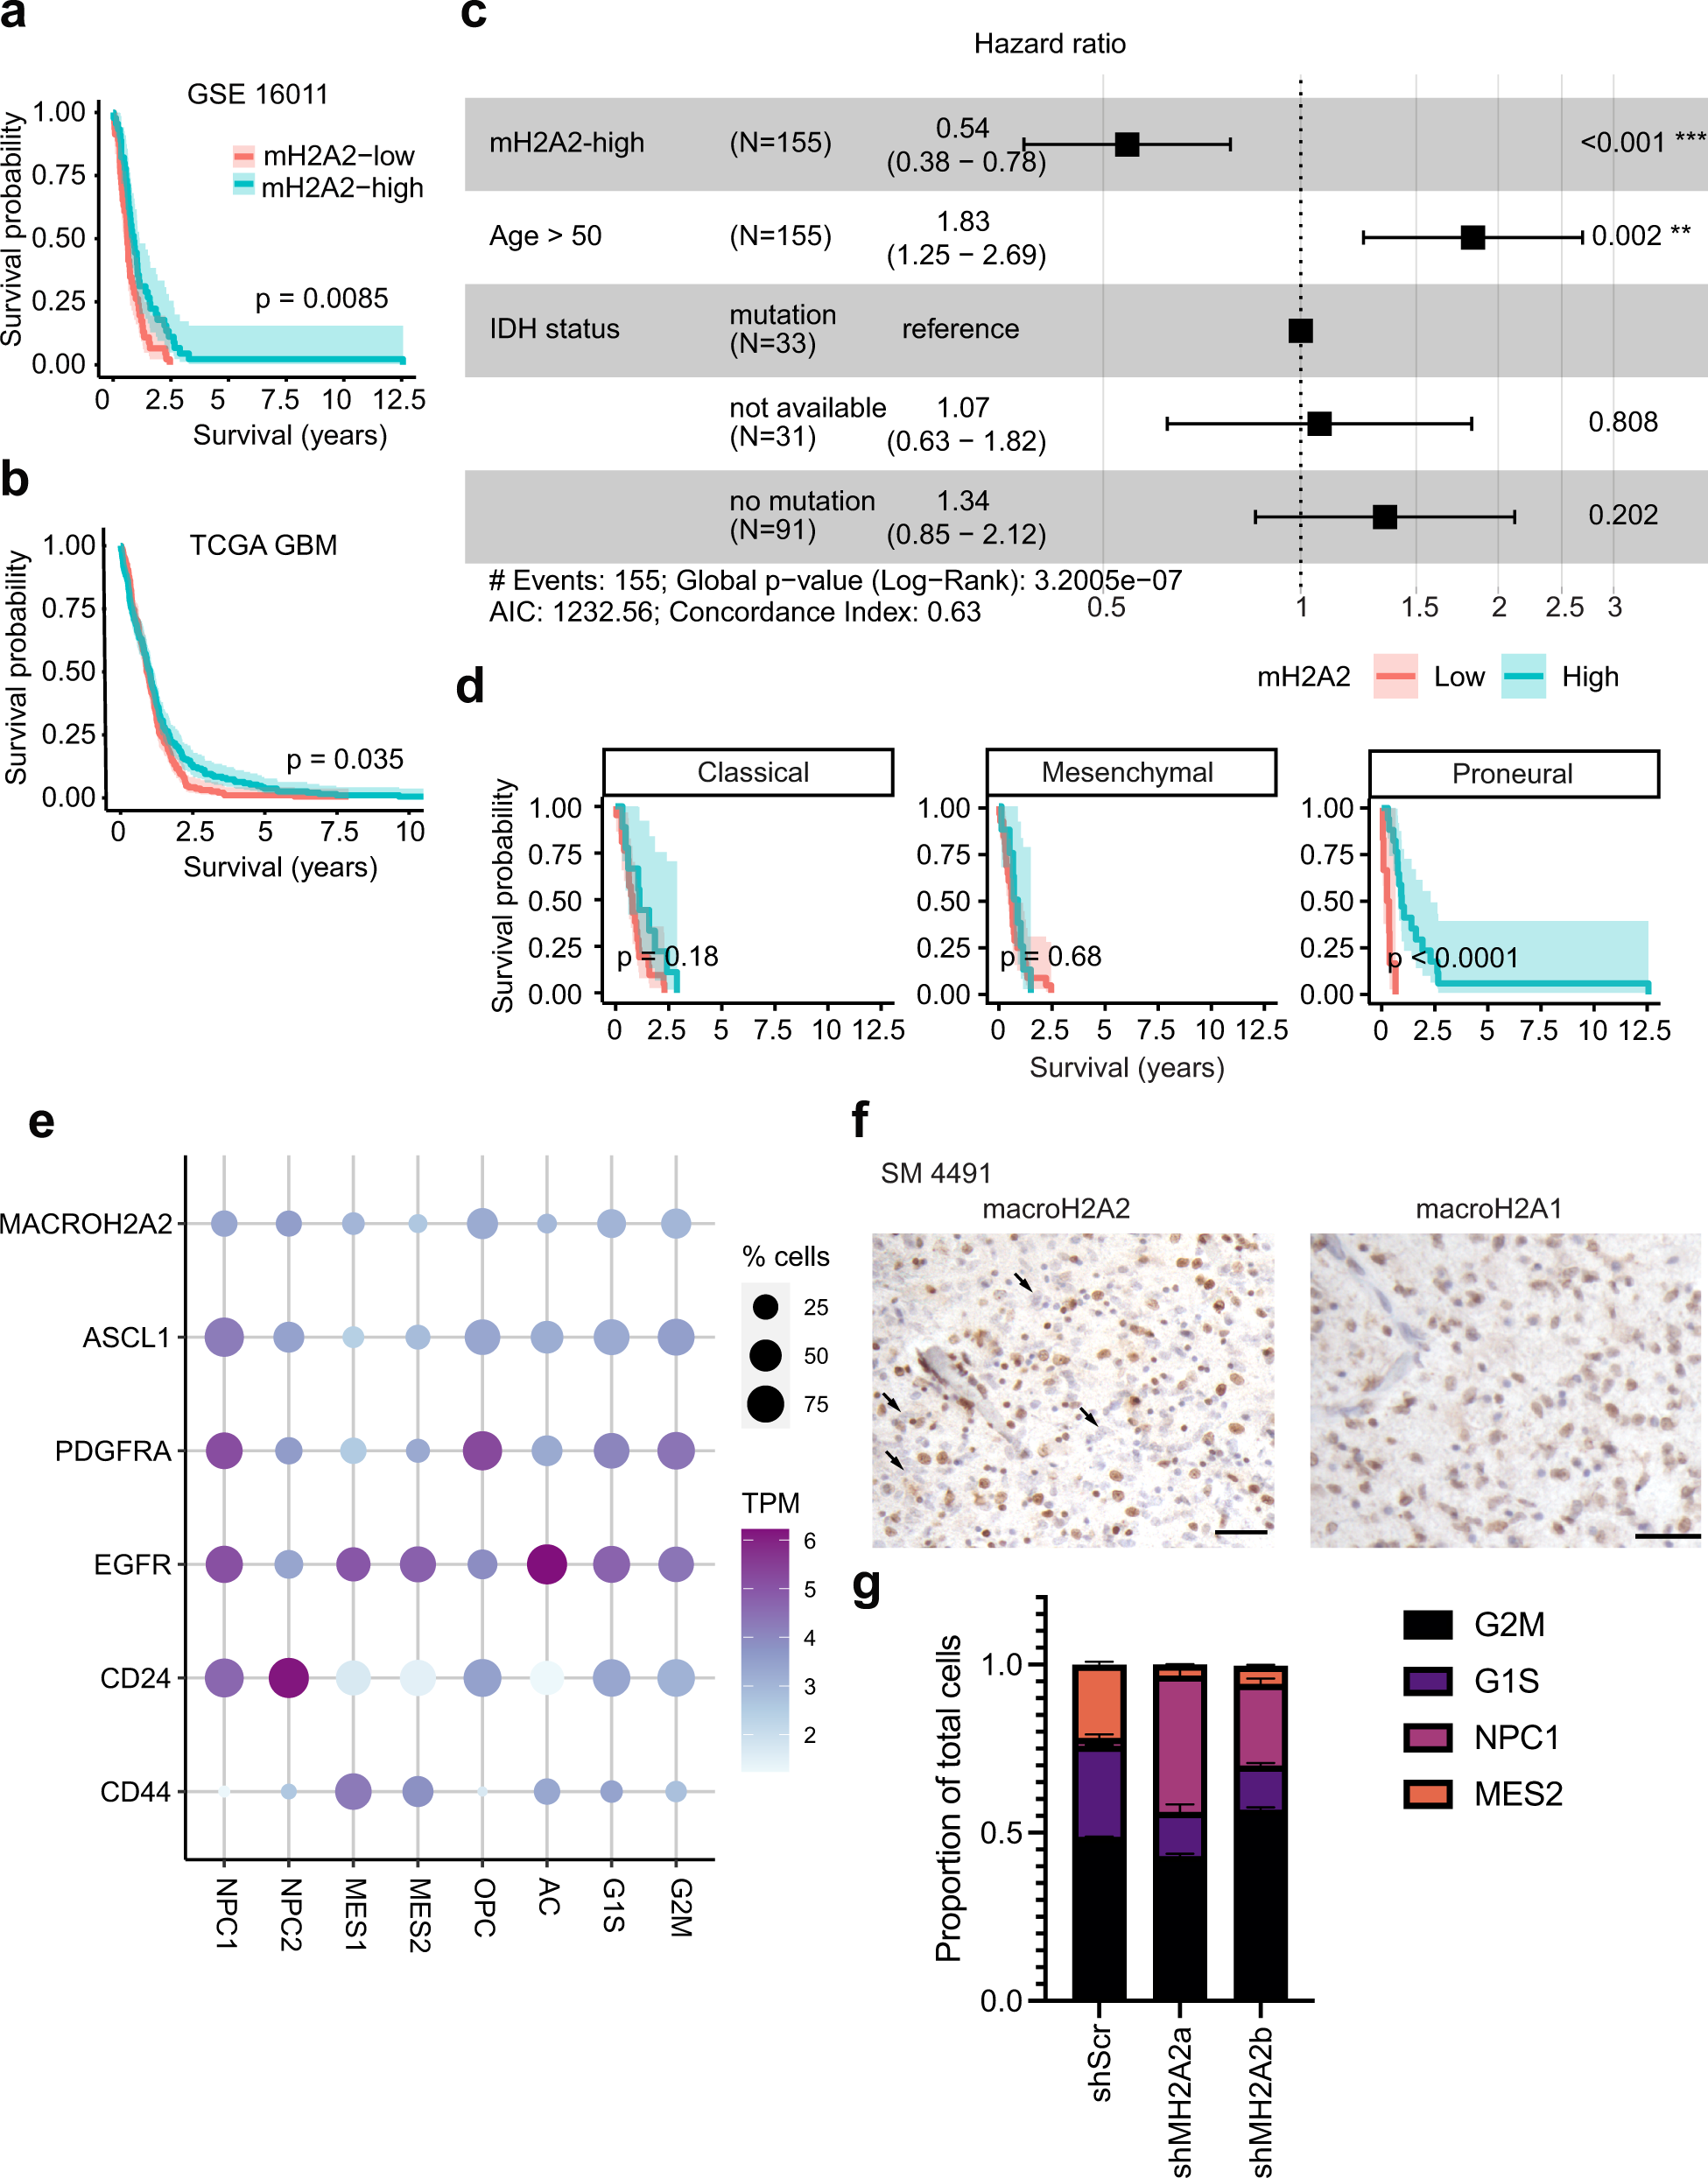 macroH2A2 antagonizes epigenetic programs of stemness in glioblastoma |  Nature Communications